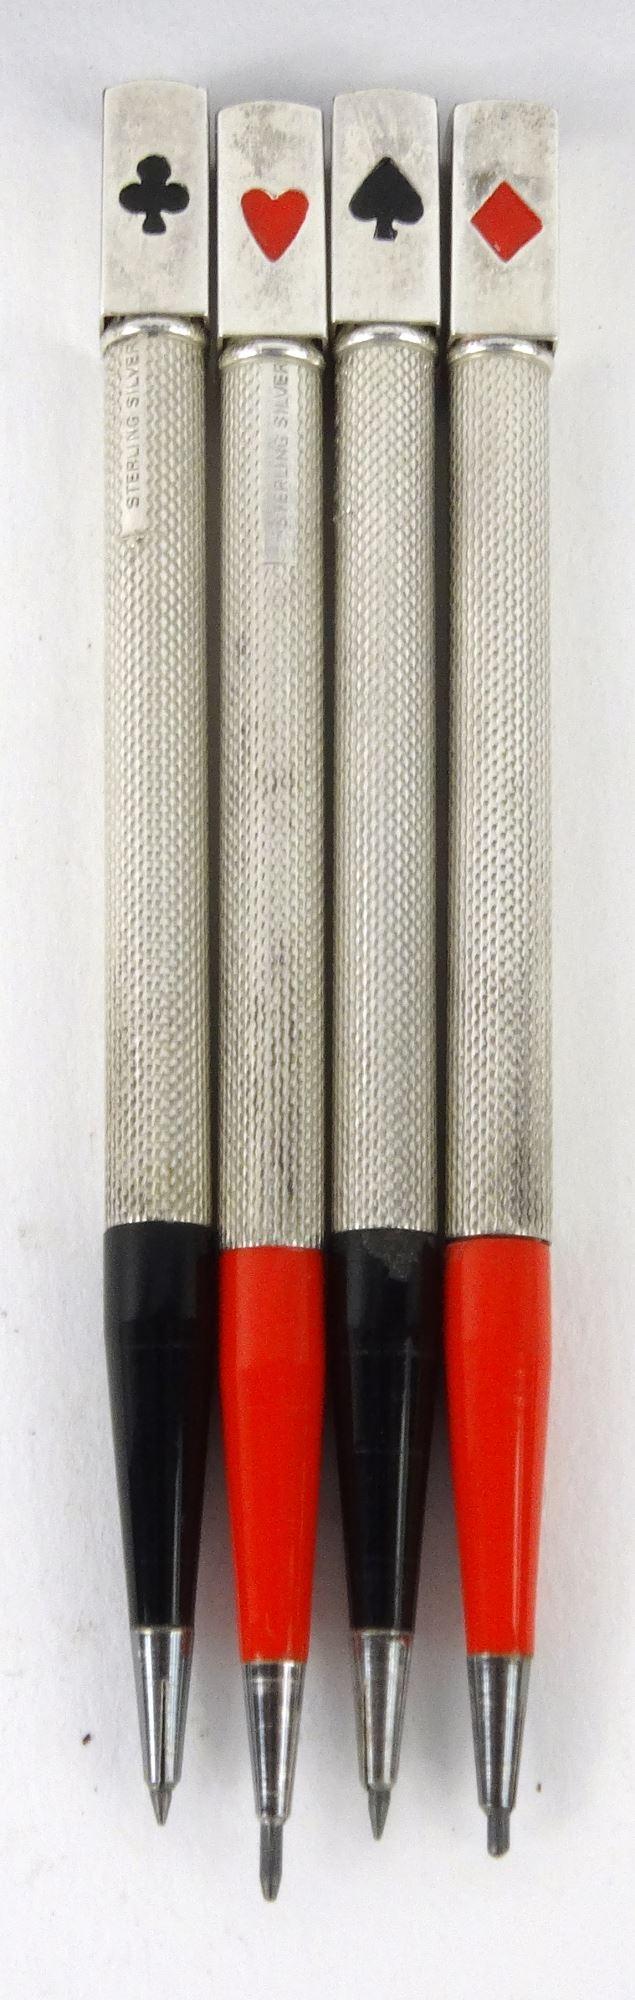 Cased set of four sterling silver and enamel bridge pencils, marked 'Sterling Silver', each pencil - Image 3 of 5